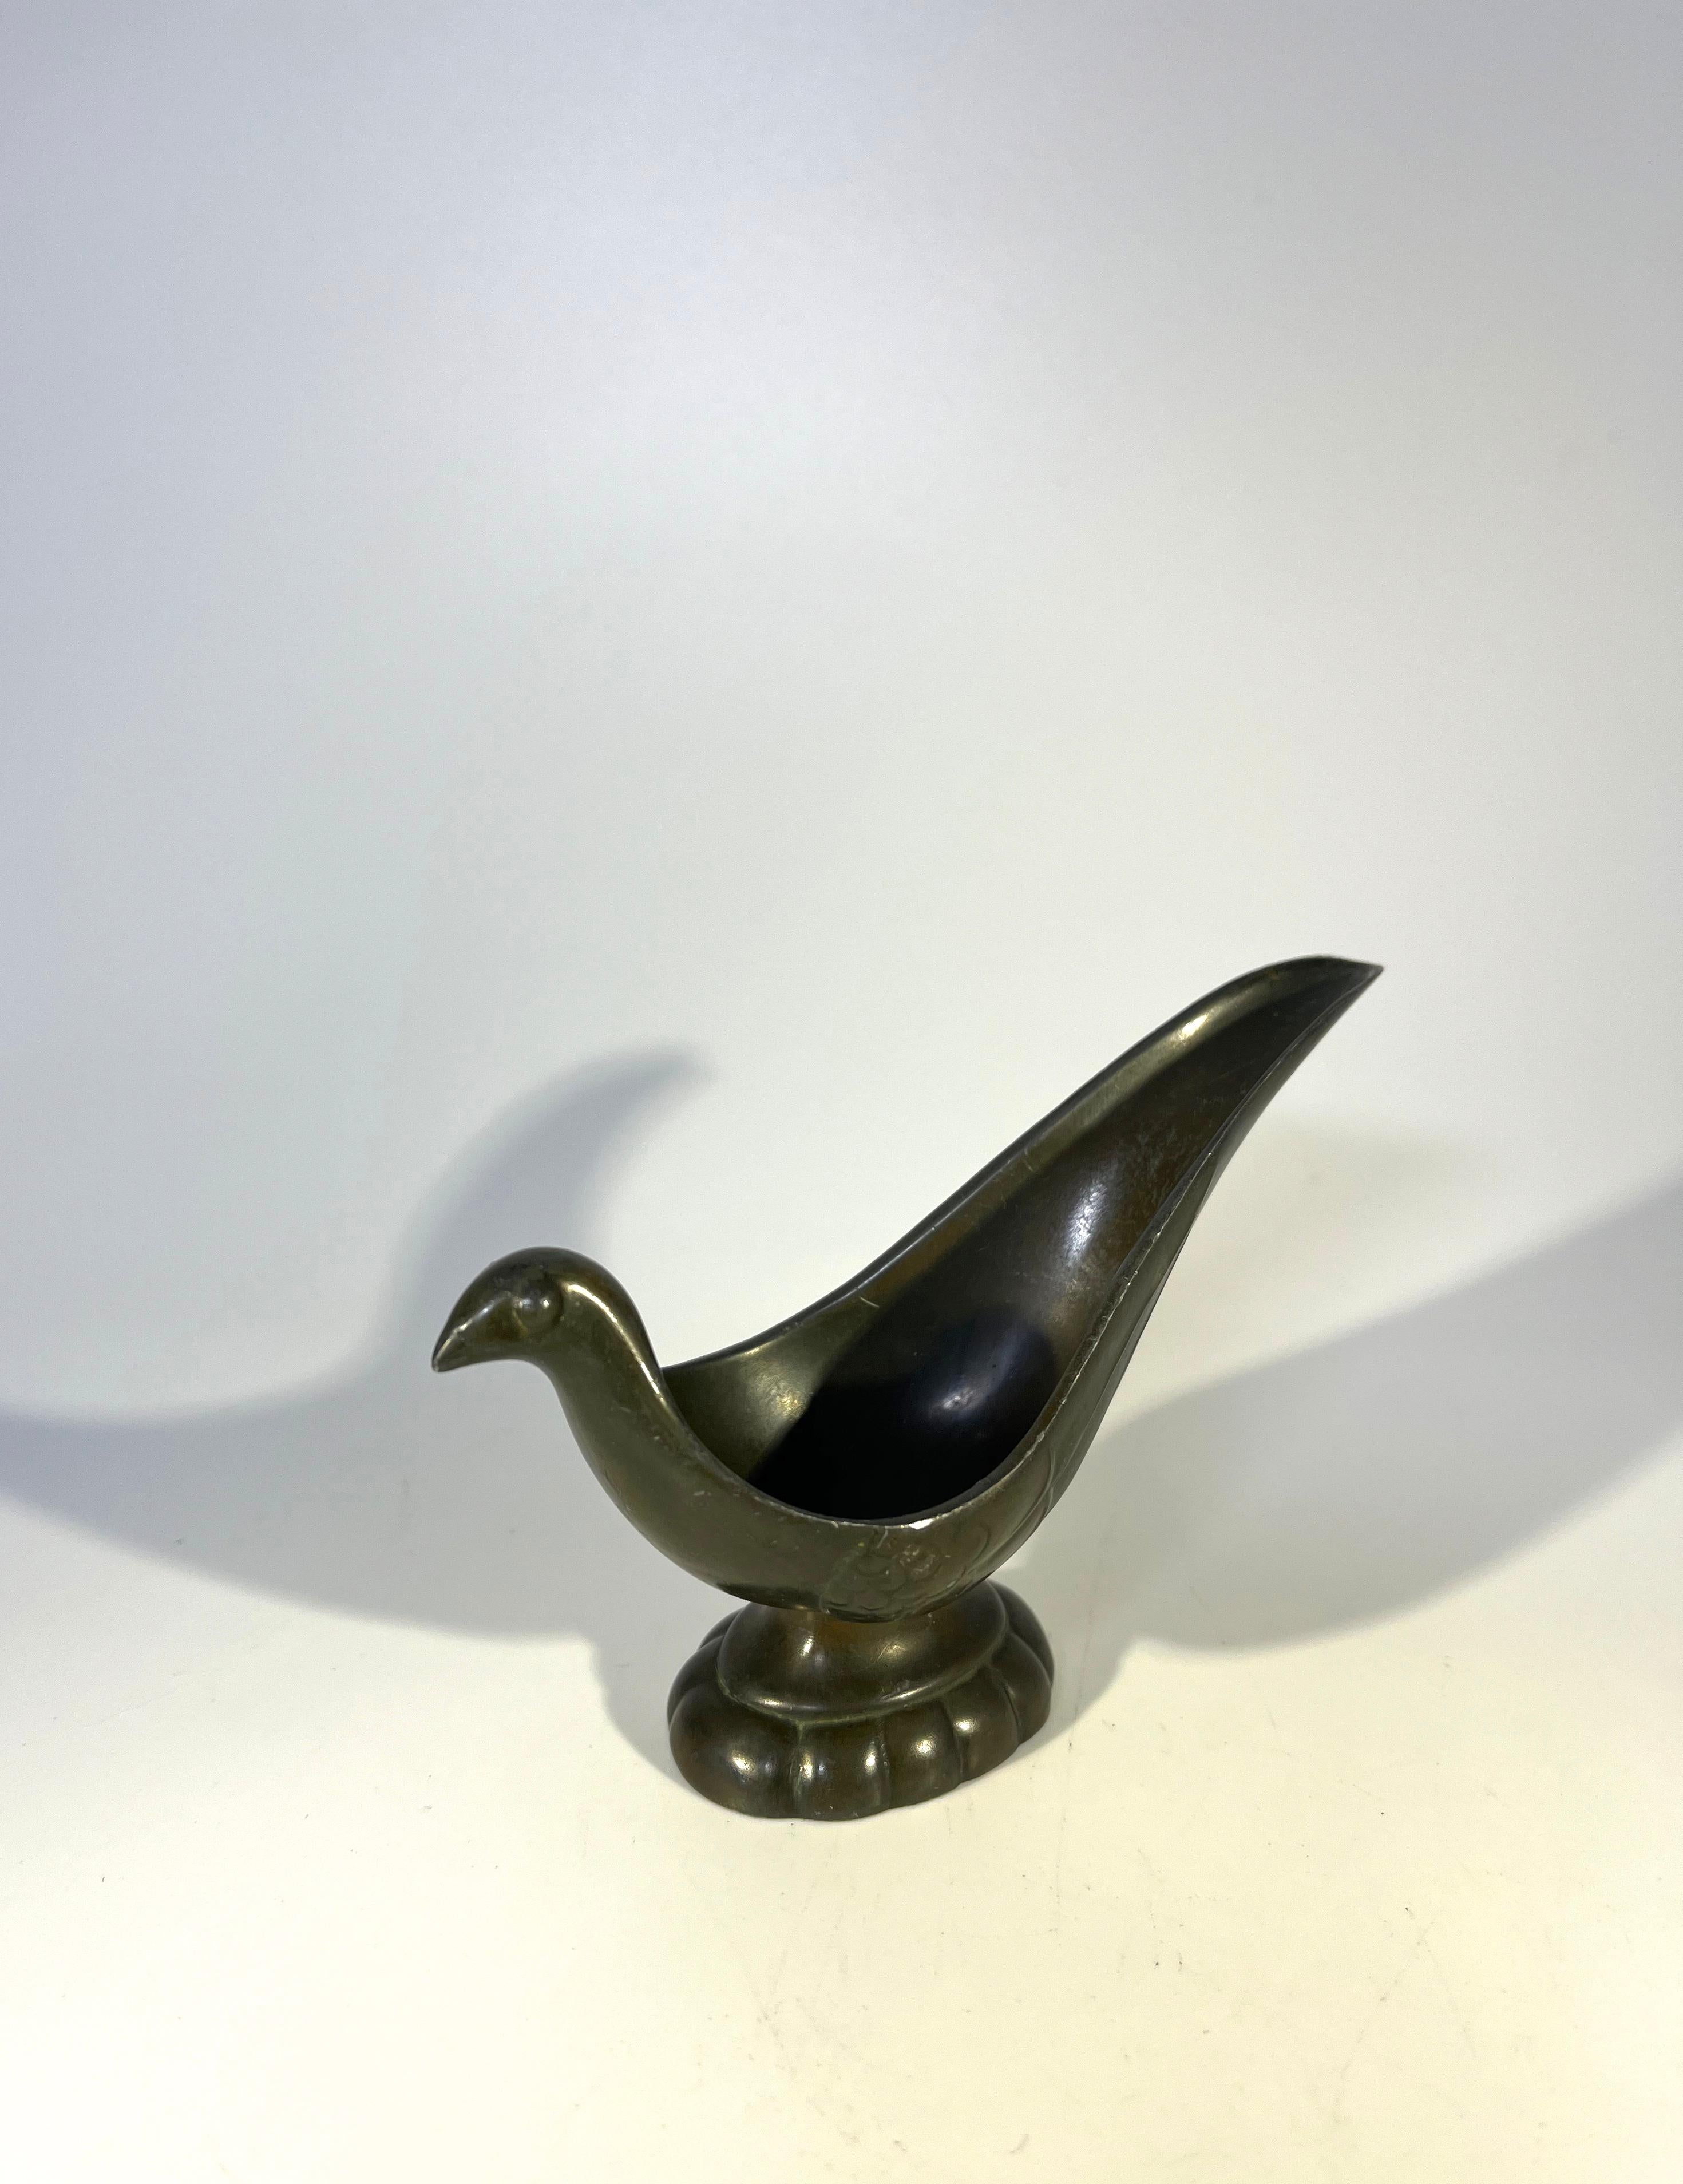 Just Andersen of Denmark, disko metal stylised bird pipe rest
Disko metal, invented by Just Andersen by combing lead and antimony
circa 1930s
Stamped on base
Measures: Height 2.5 inch, width 4.25 inch, depth 1.5 inch
Very good condition and